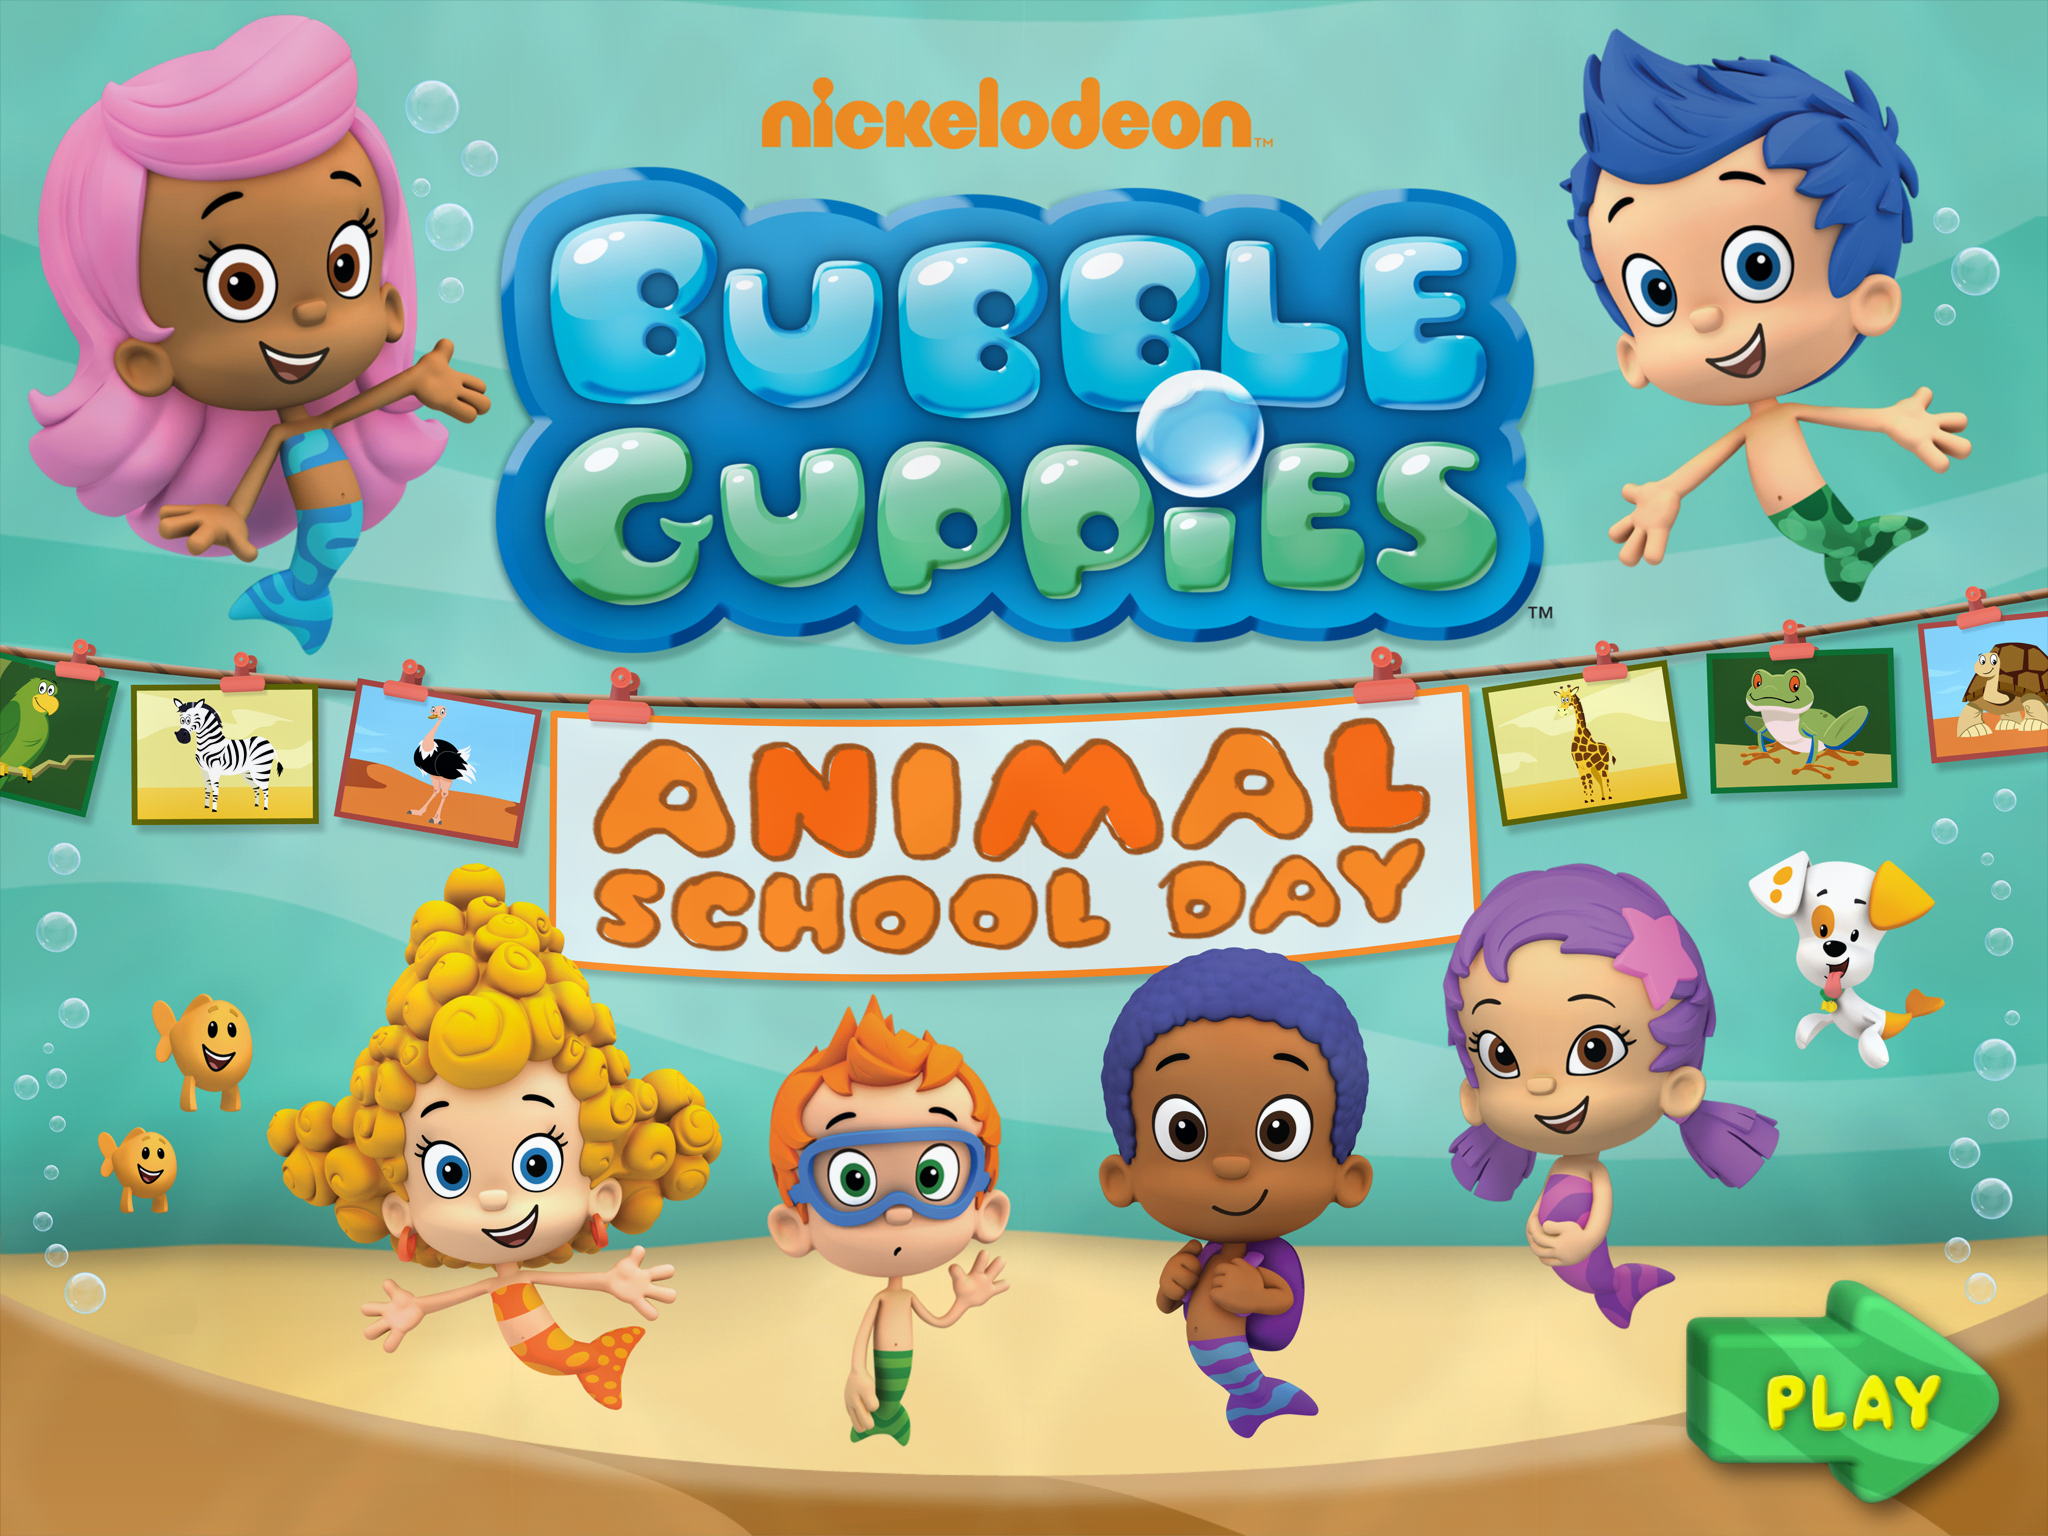 Bubble Guppies Animal School Day App - BB Product Reviews